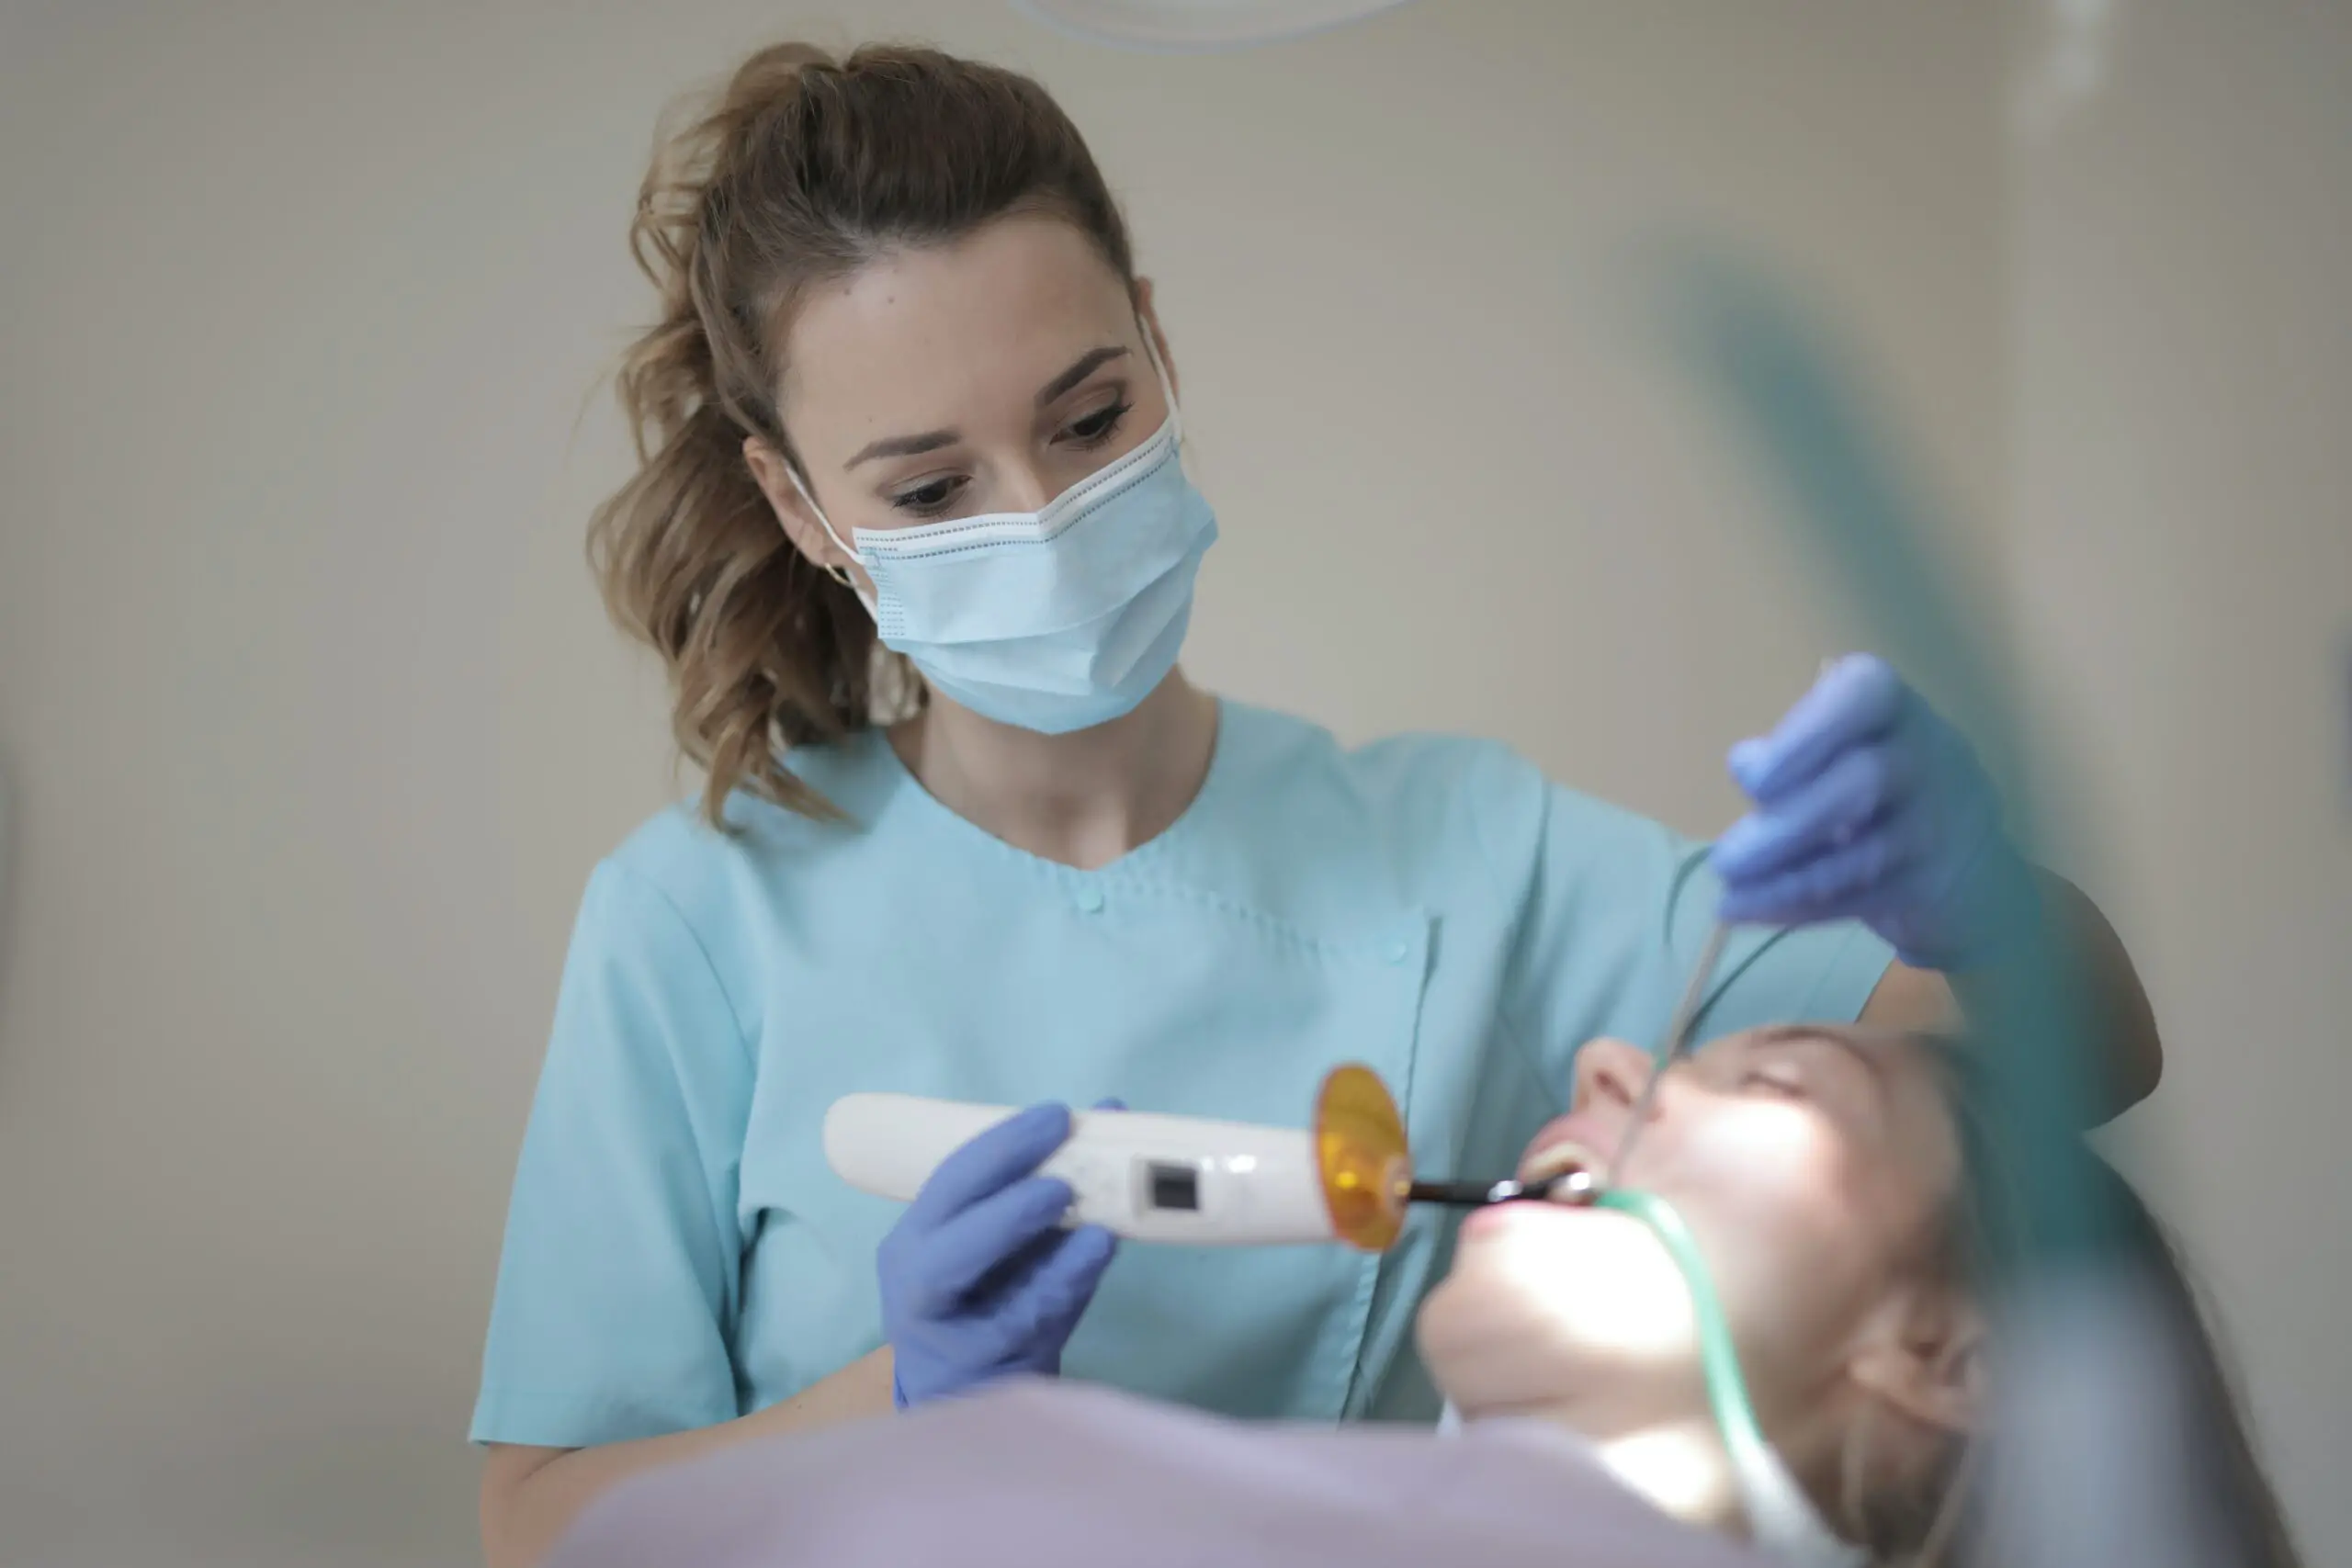 Nurse Vs Dental Hygienists, Which Career Is Better?